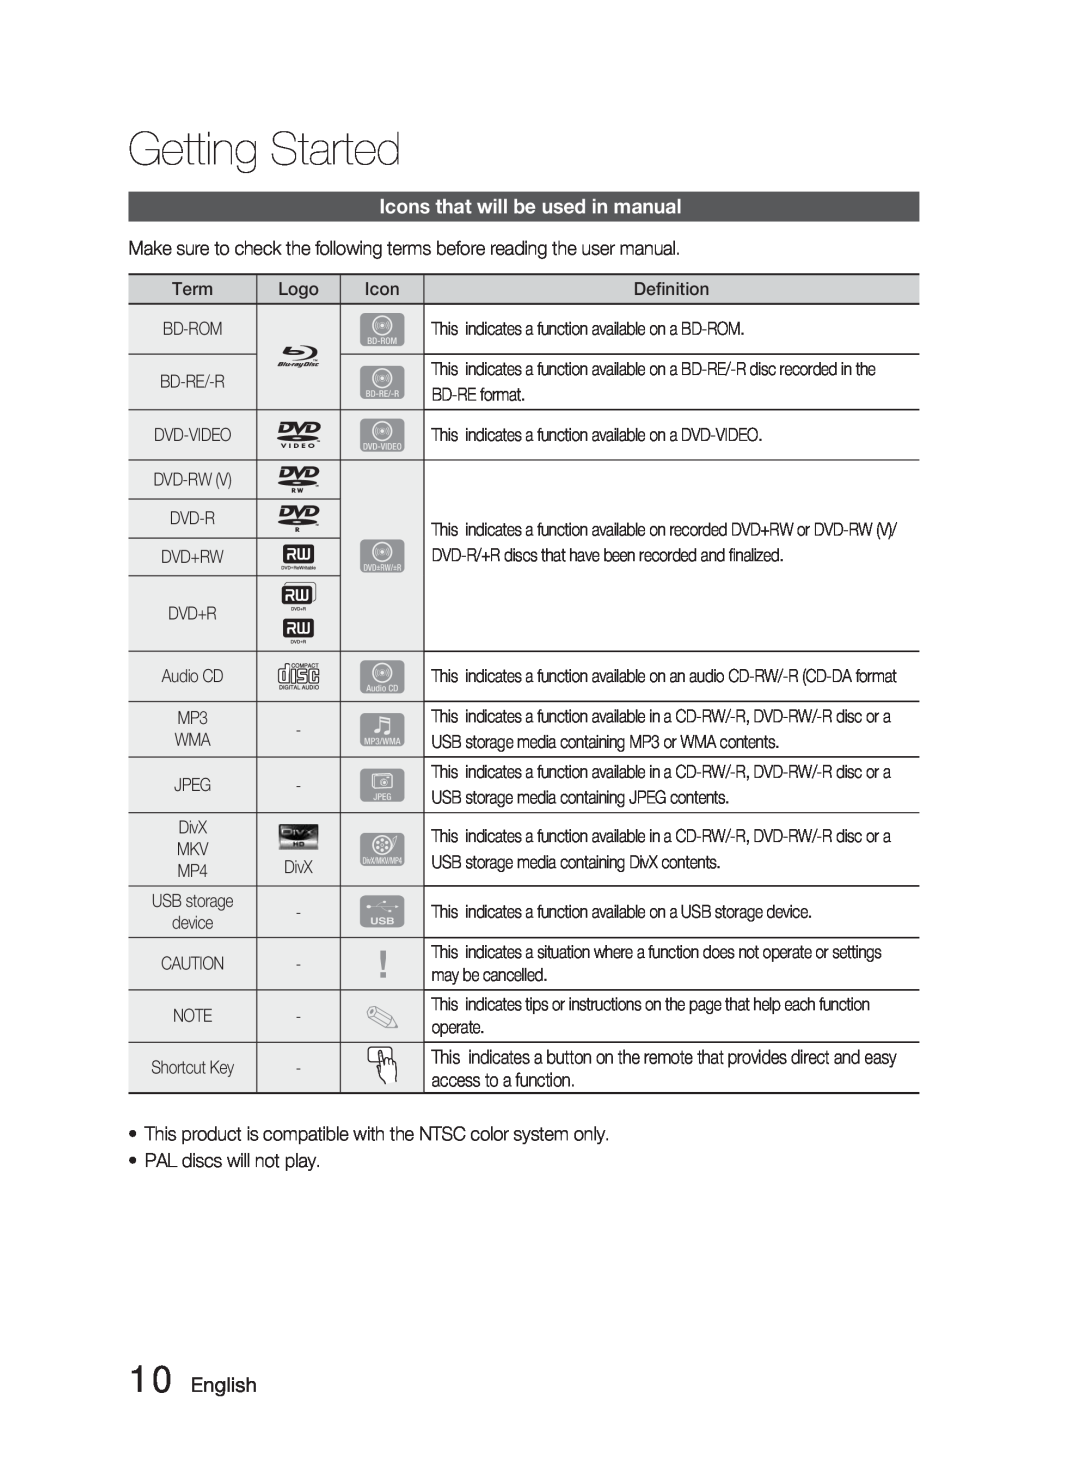 Samsung HT-C6900W user manual Icons that will be used in manual, English, Getting Started 